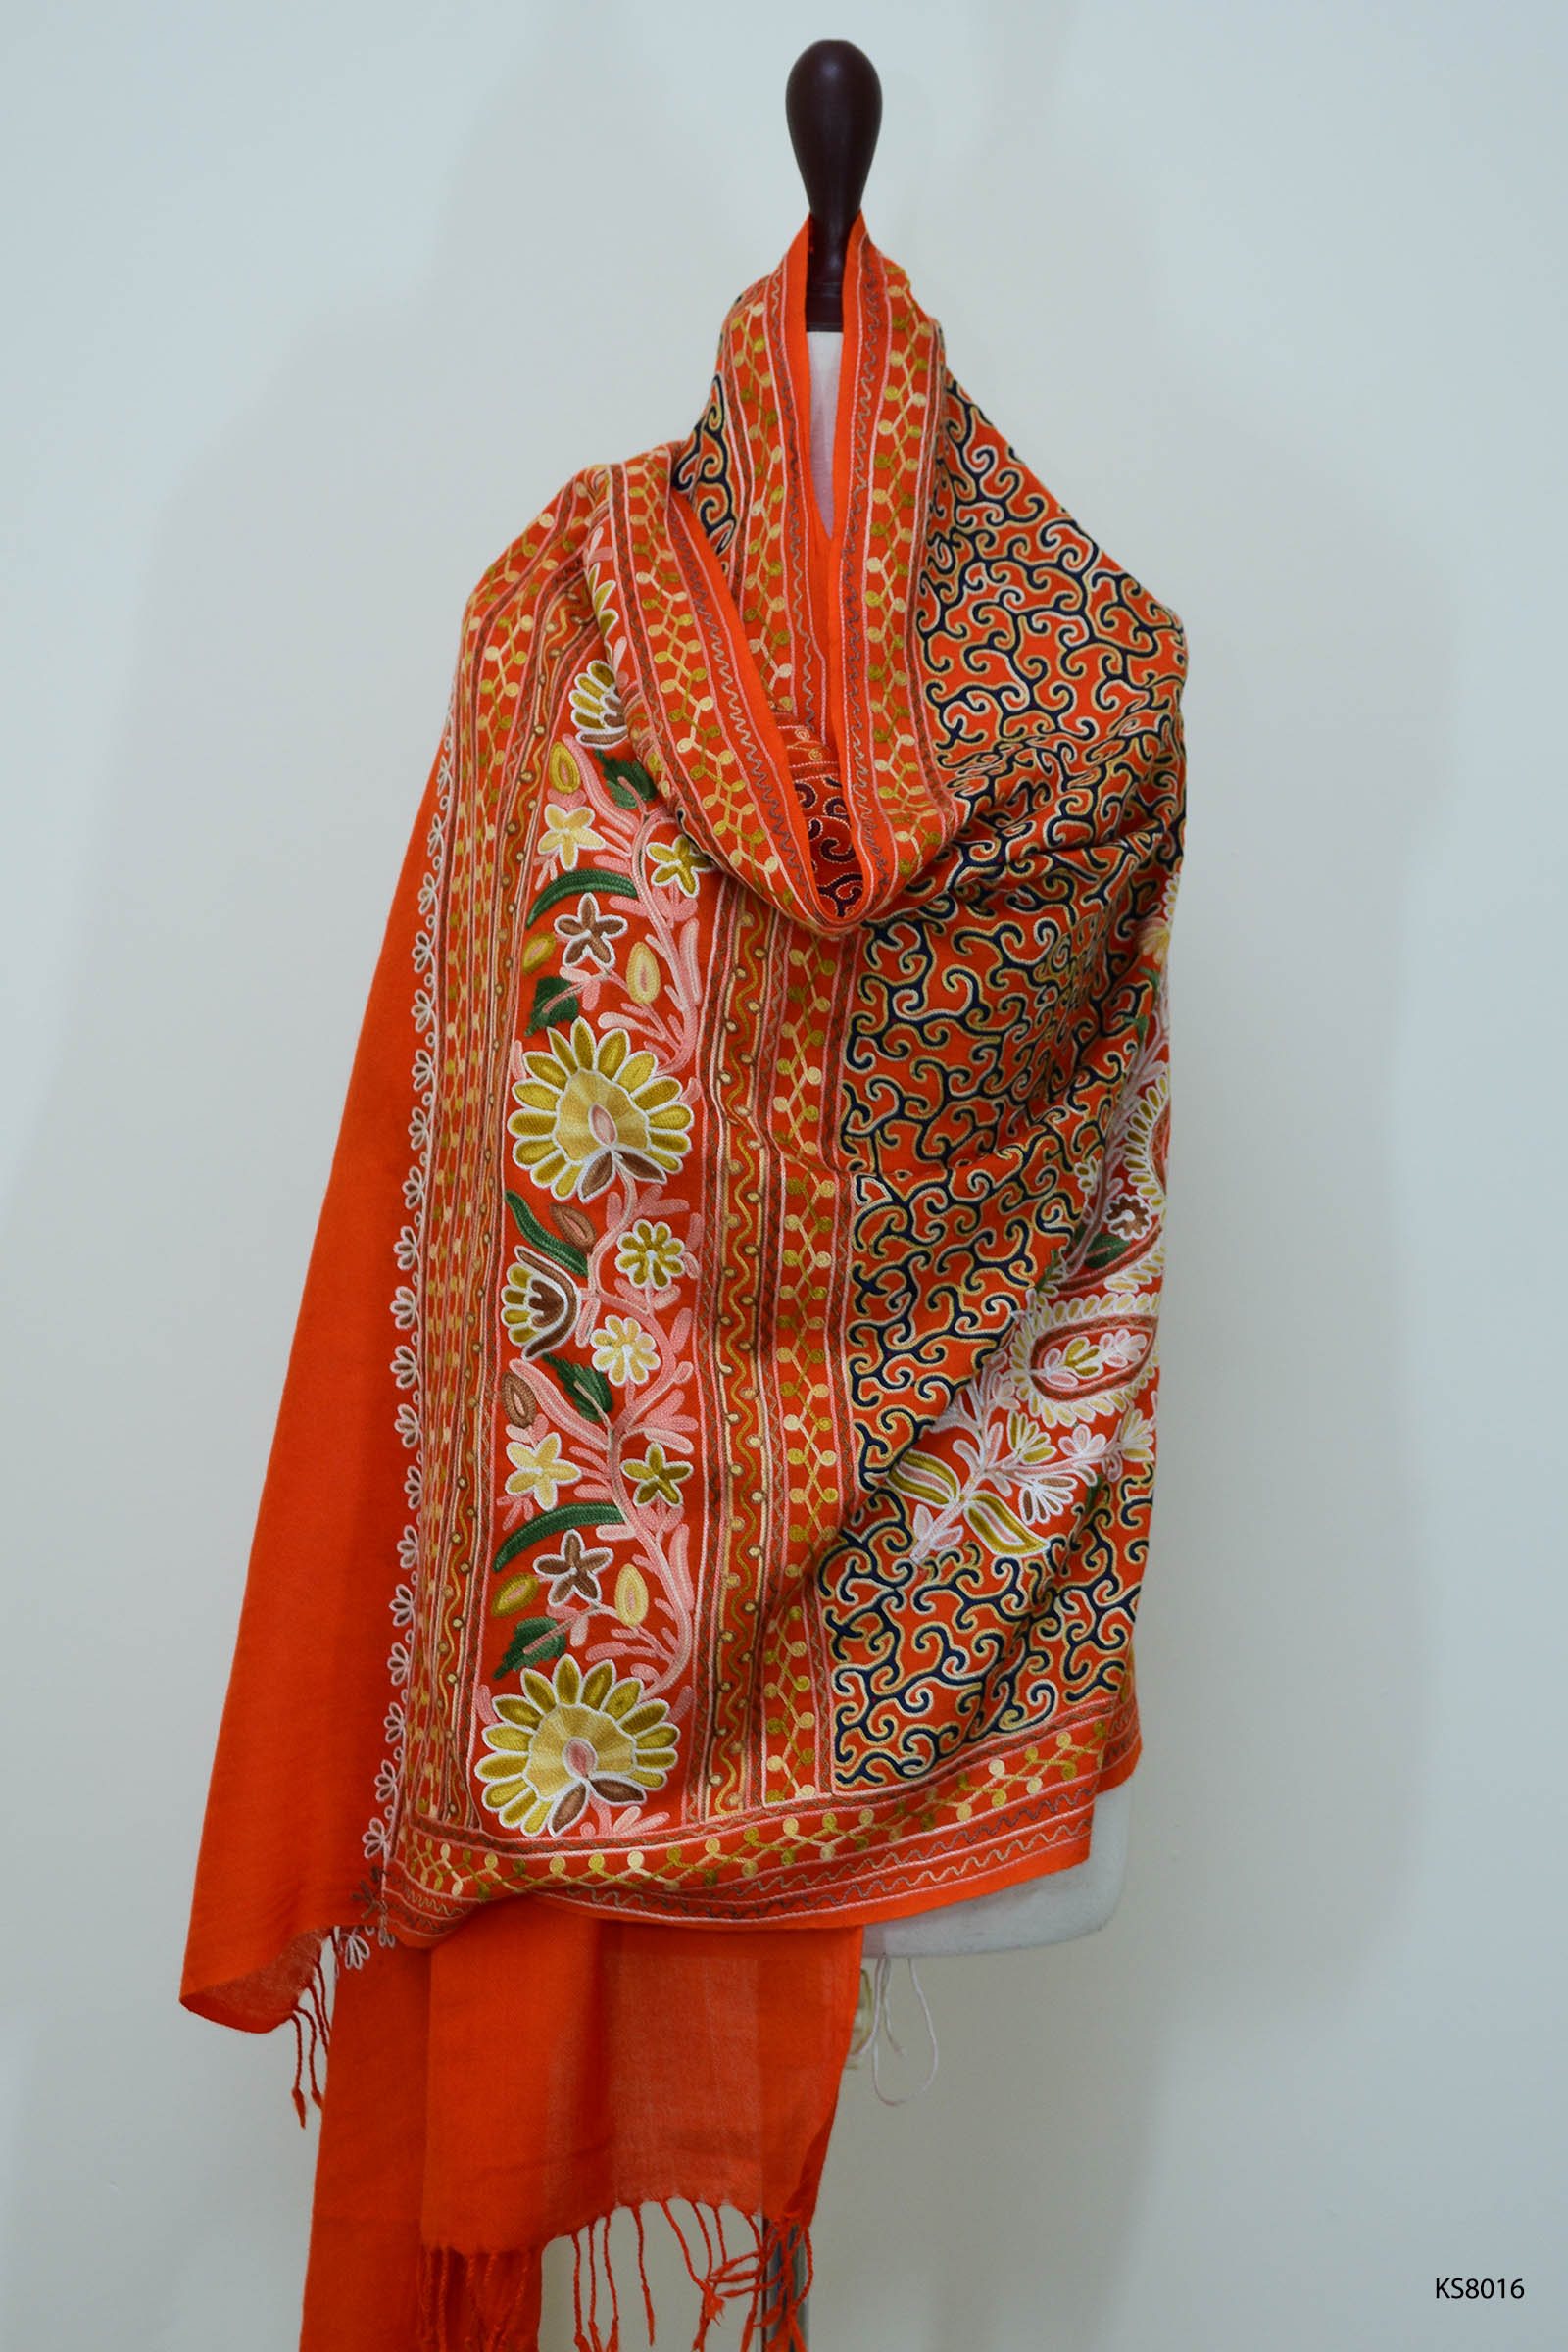 Lv Pashmina Stole Best Price In Pakistan, Rs 2200